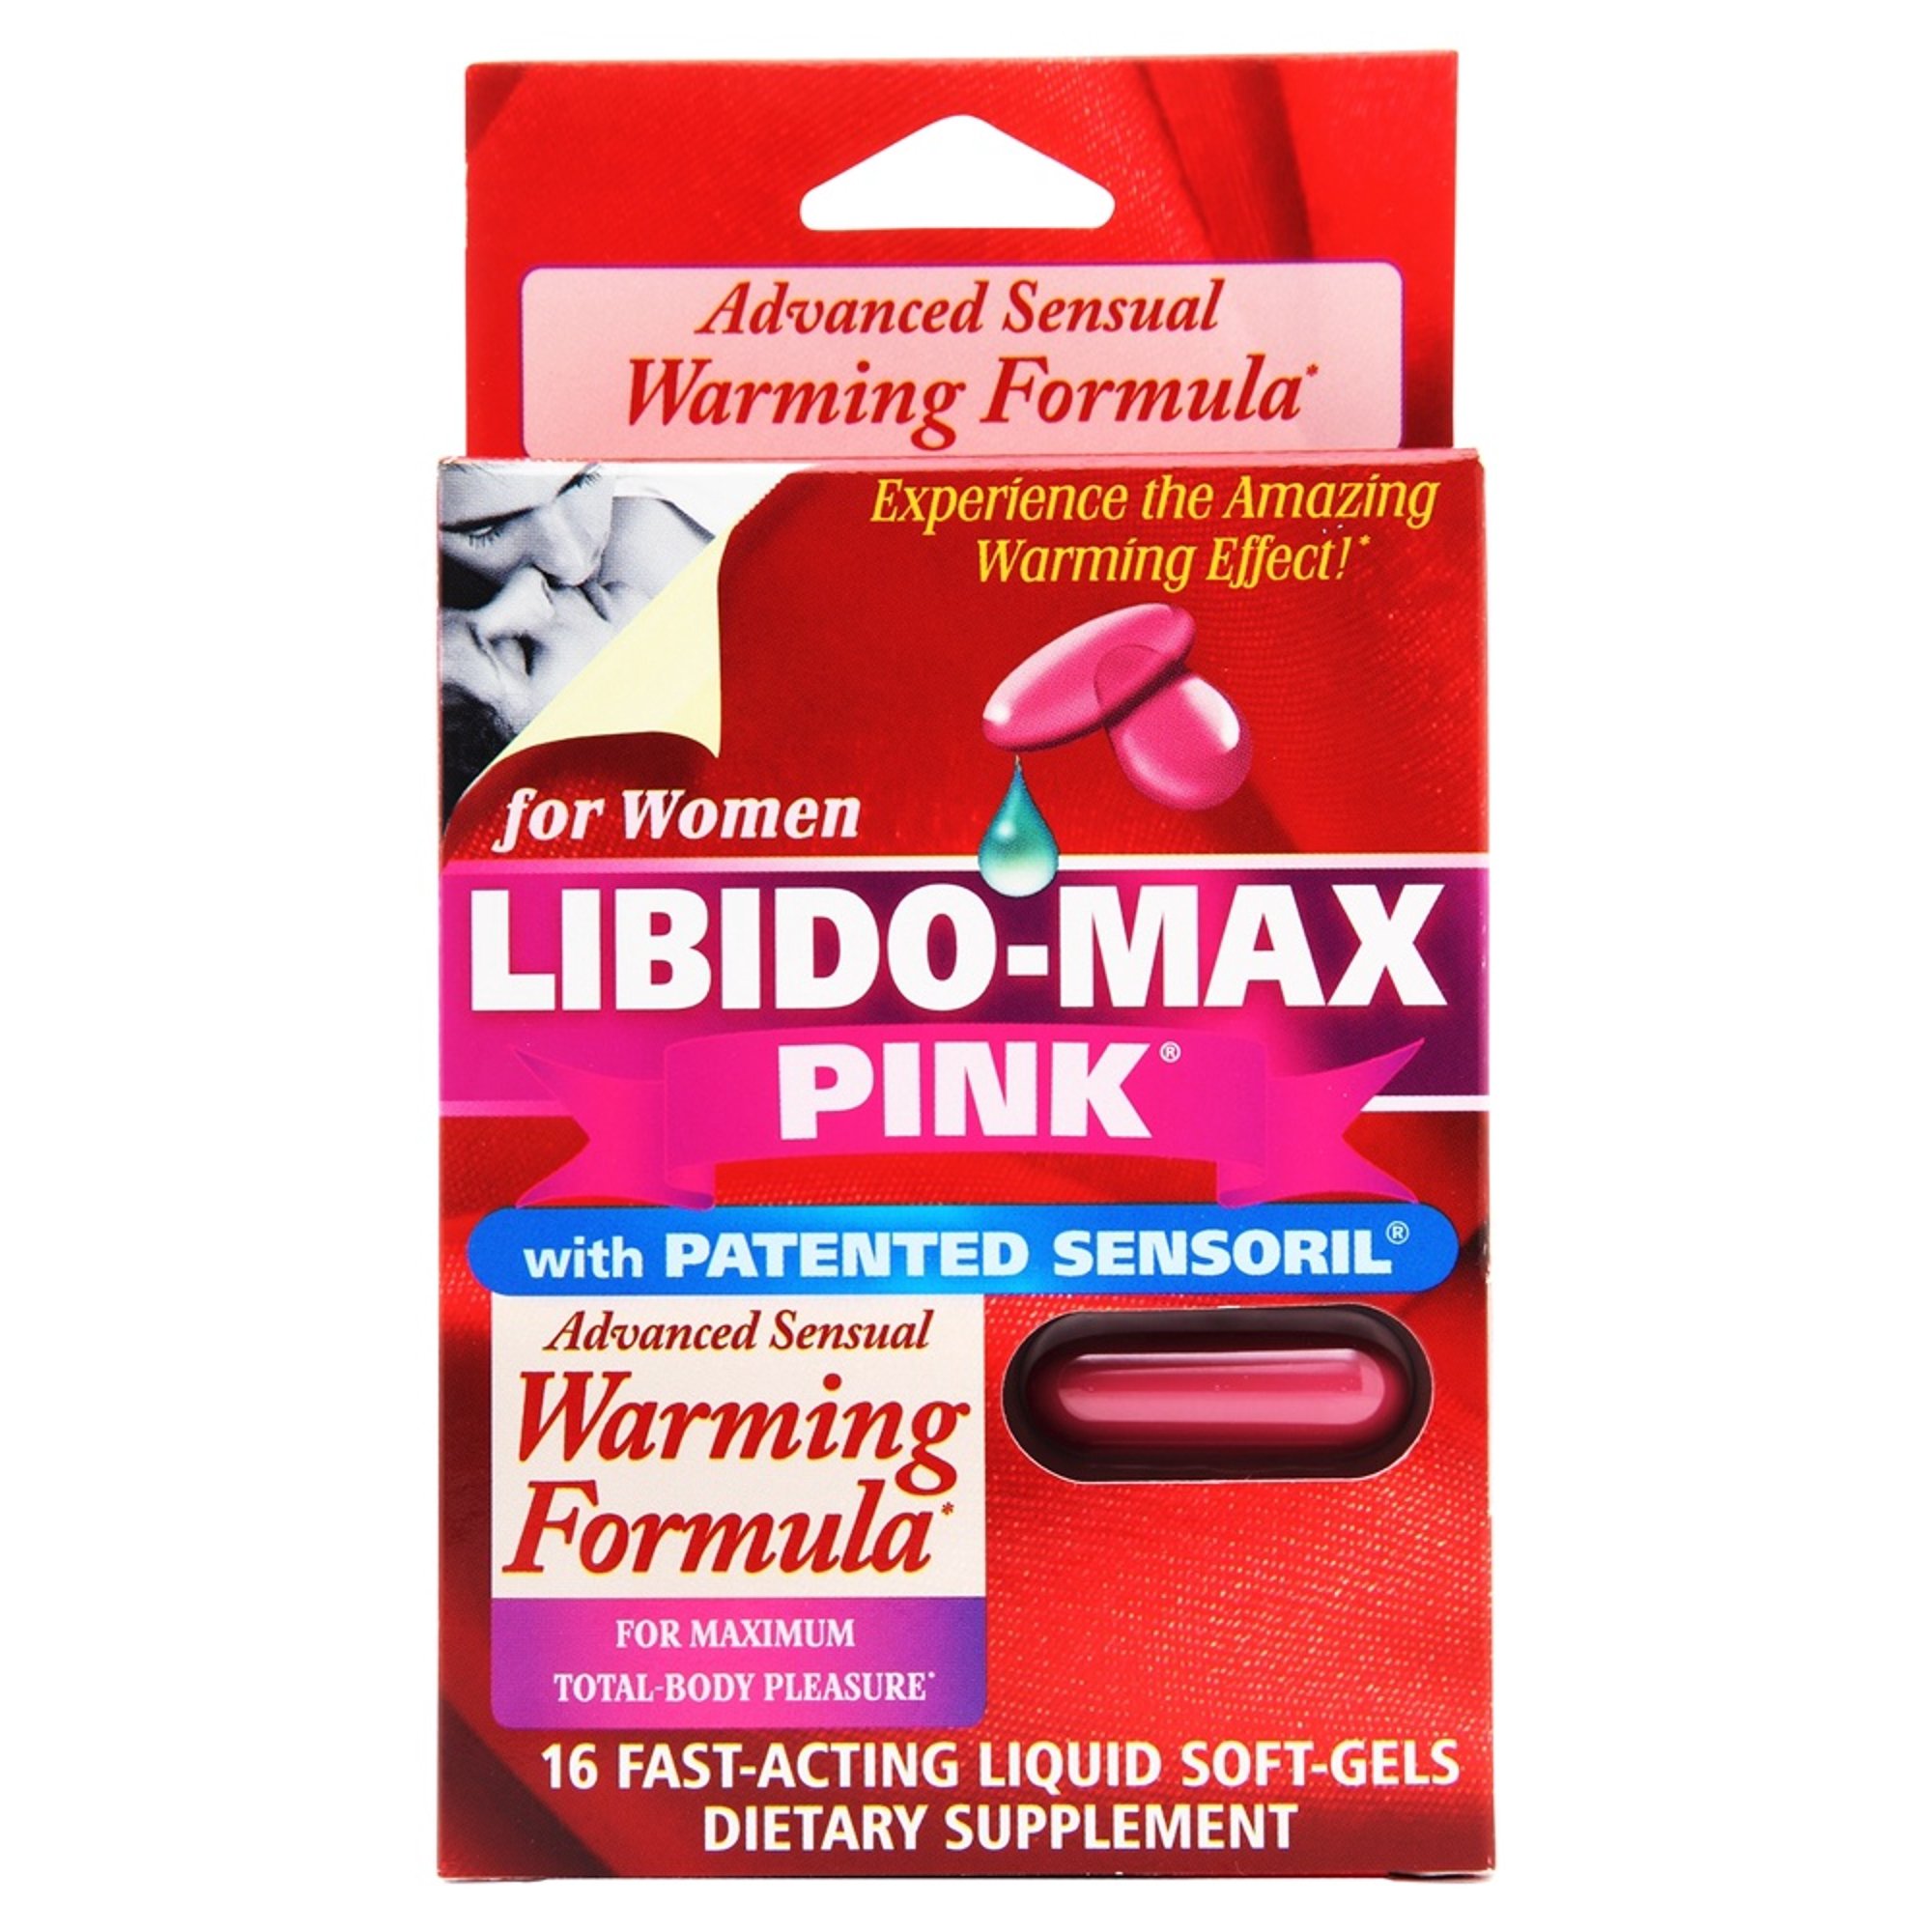 Applied Nutrition Libido-Max Pink, For Women, 16 Fast-Acting Liquid Soft-Gels